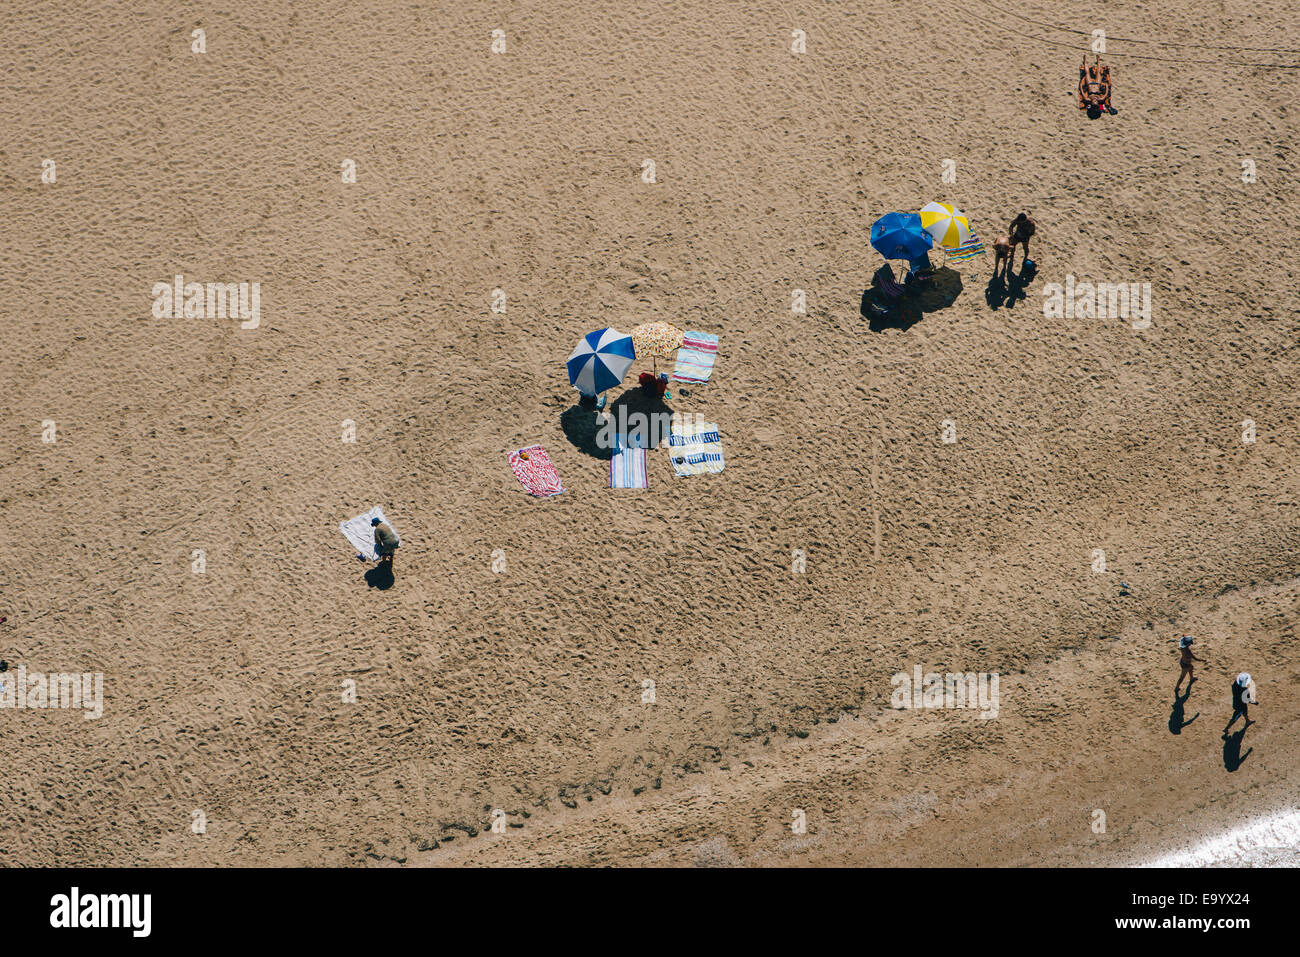 Aerial view of holiday makers on beach, Melbourne, Victoria, Australia Stock Photo